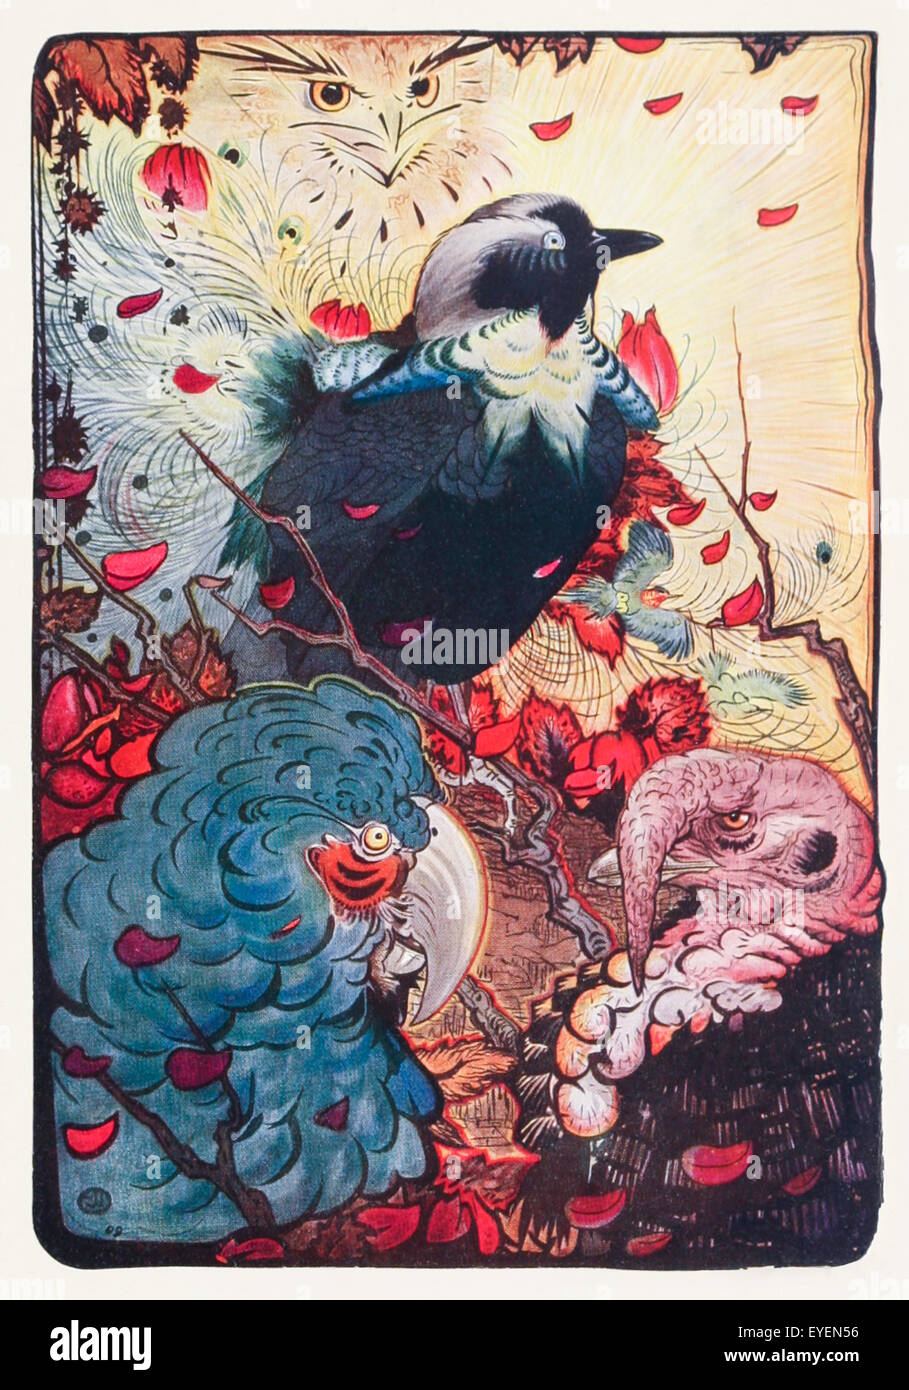 'The Vain Jackdaw' fable by Aesop (circa 600BC). A Jackdaw tried to make itself look pretty using the feathers of other birds who plucked them back. Borrowed feathers do not make fine birds. Illustration by Edward J. Detmold (1883-1957). See description for more information. Stock Photo